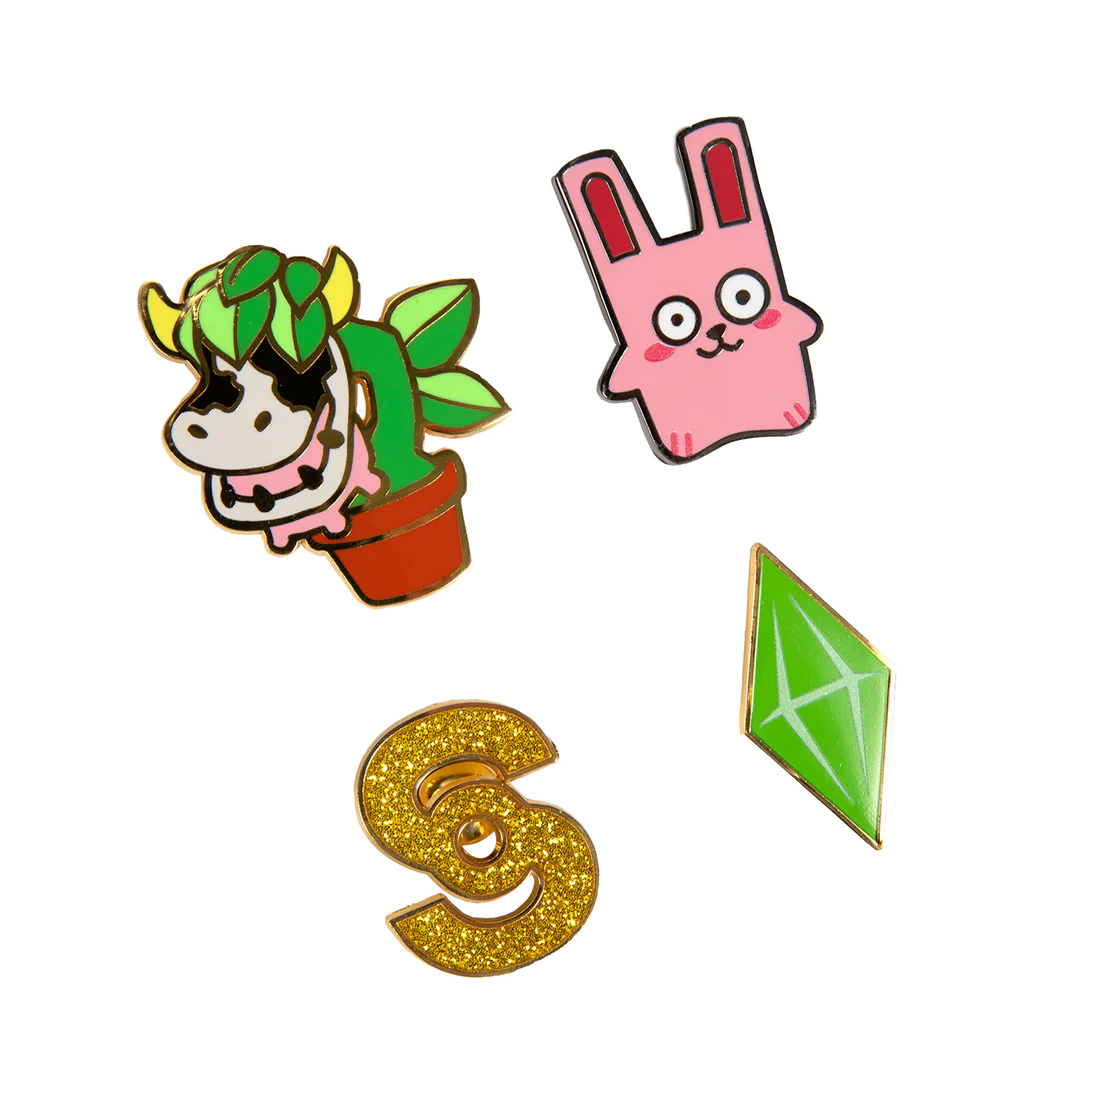 The Sims Pins